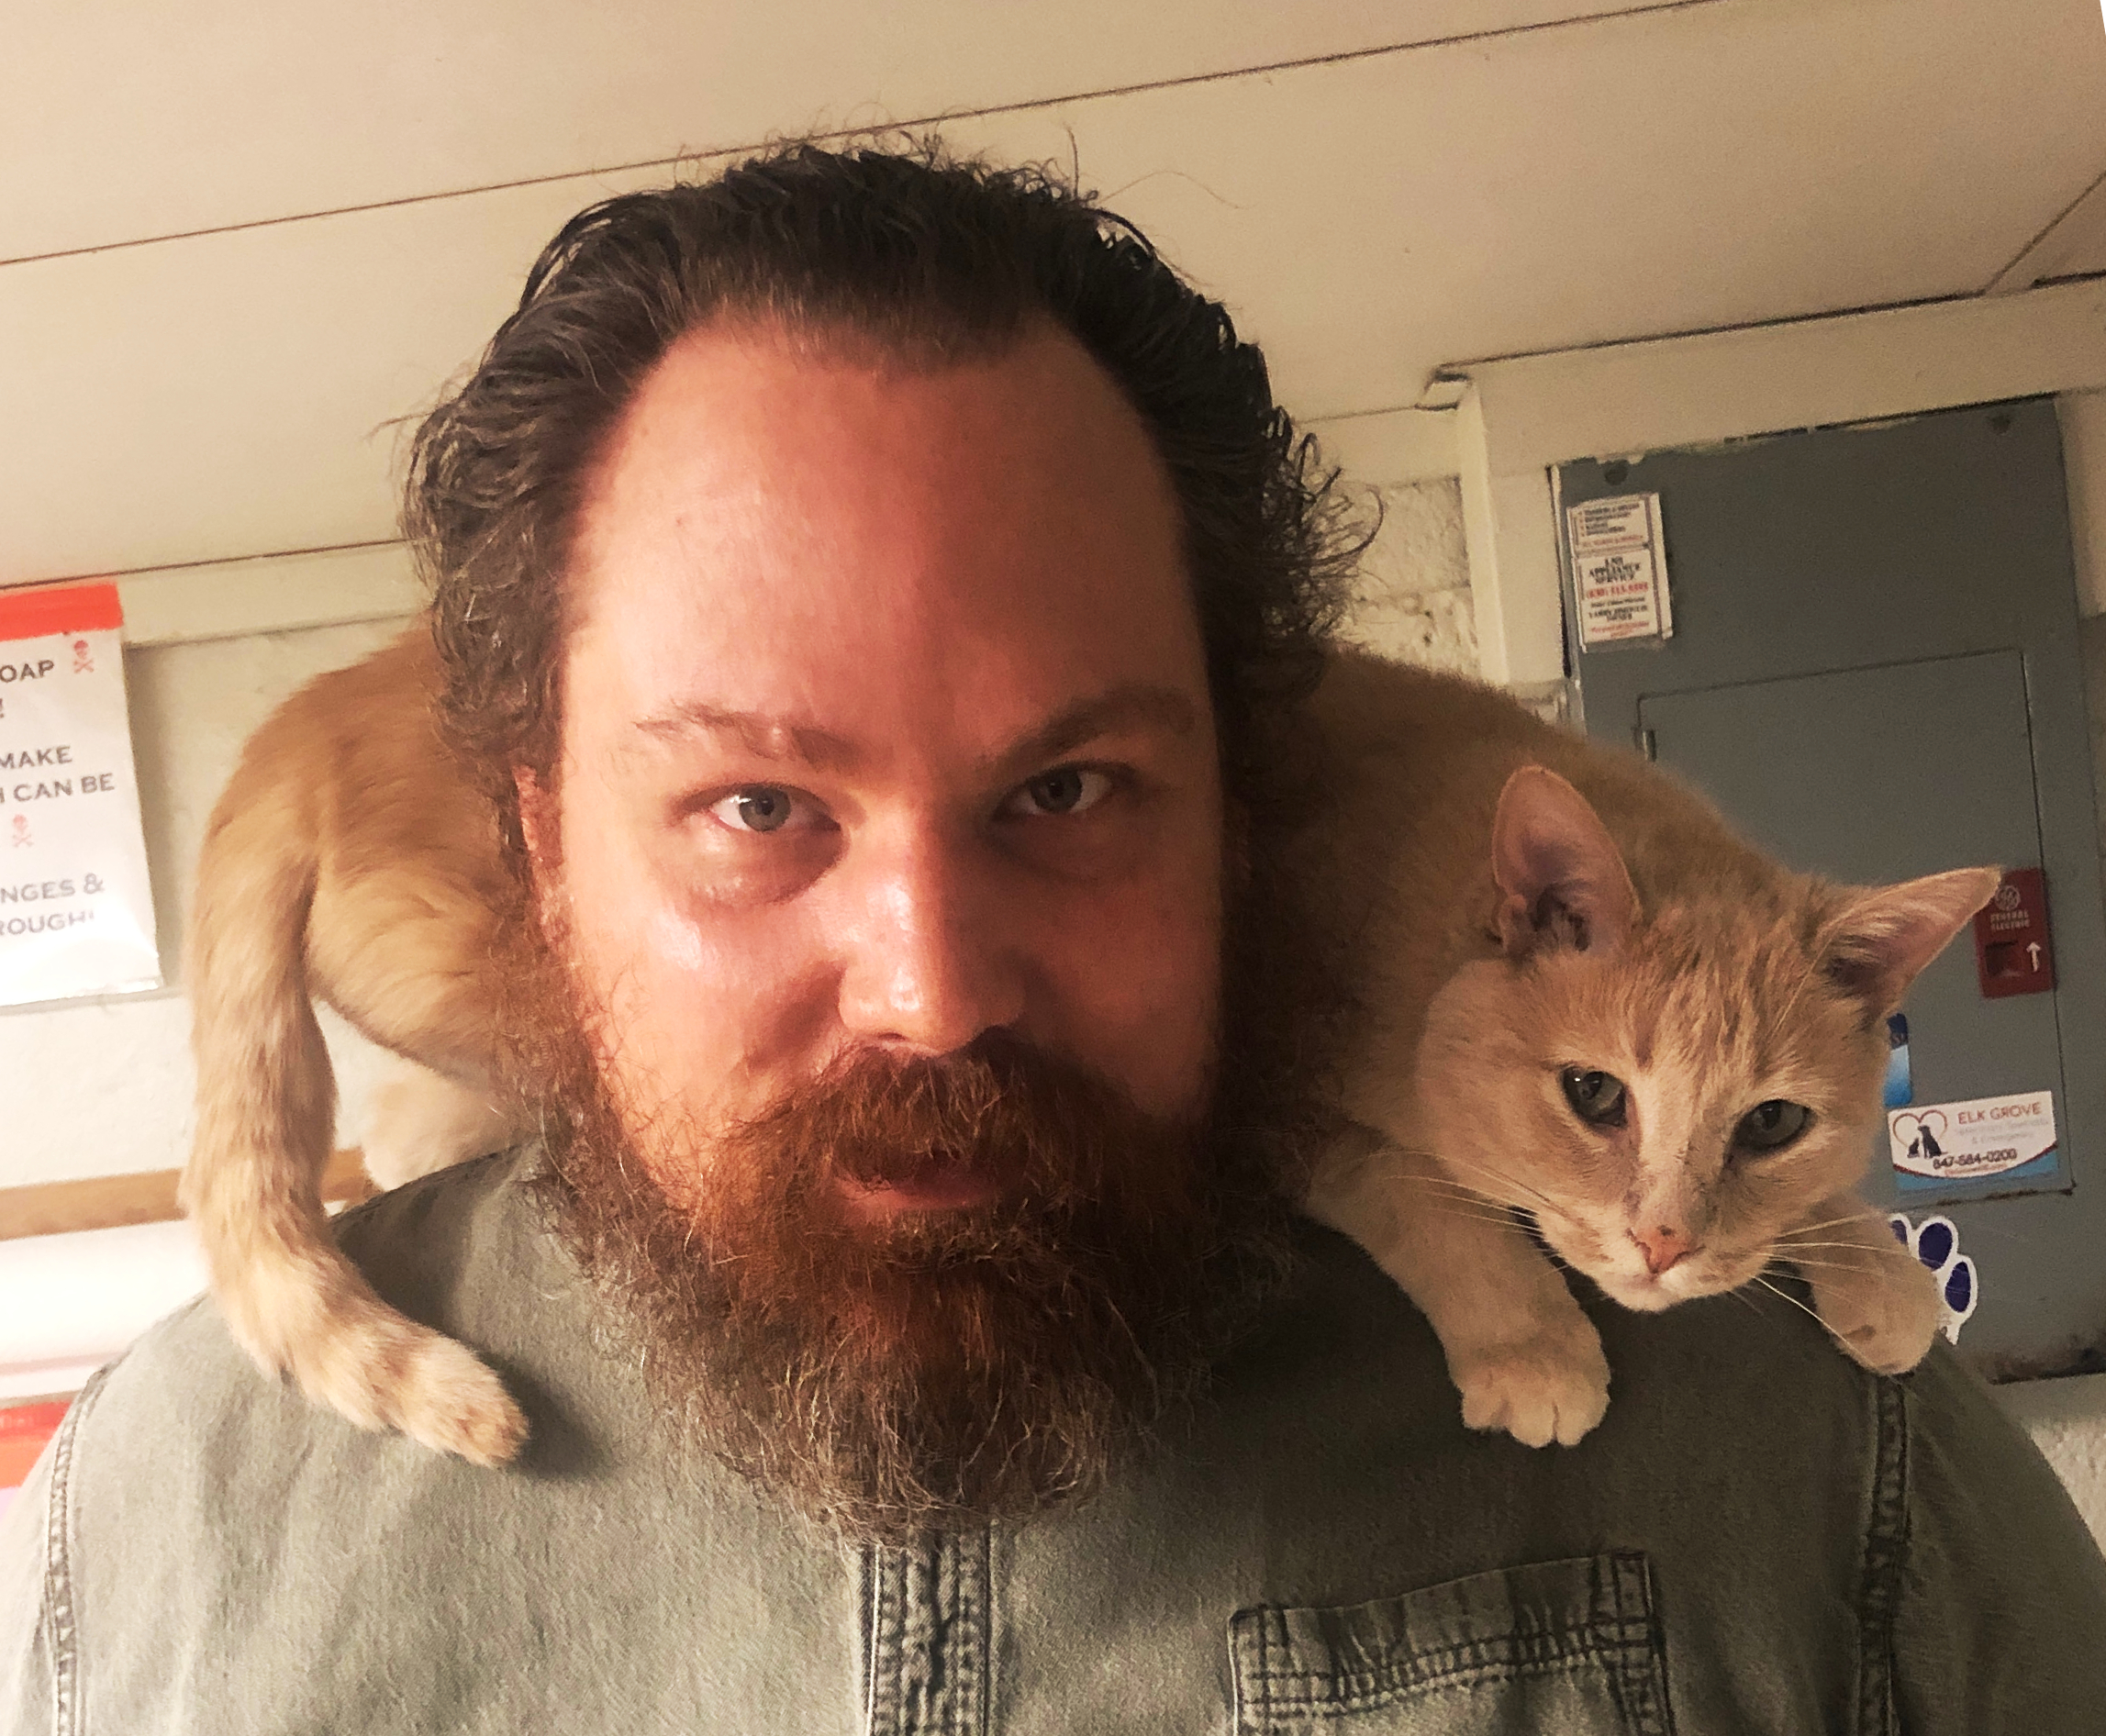 The author with a cat over his shoulders.